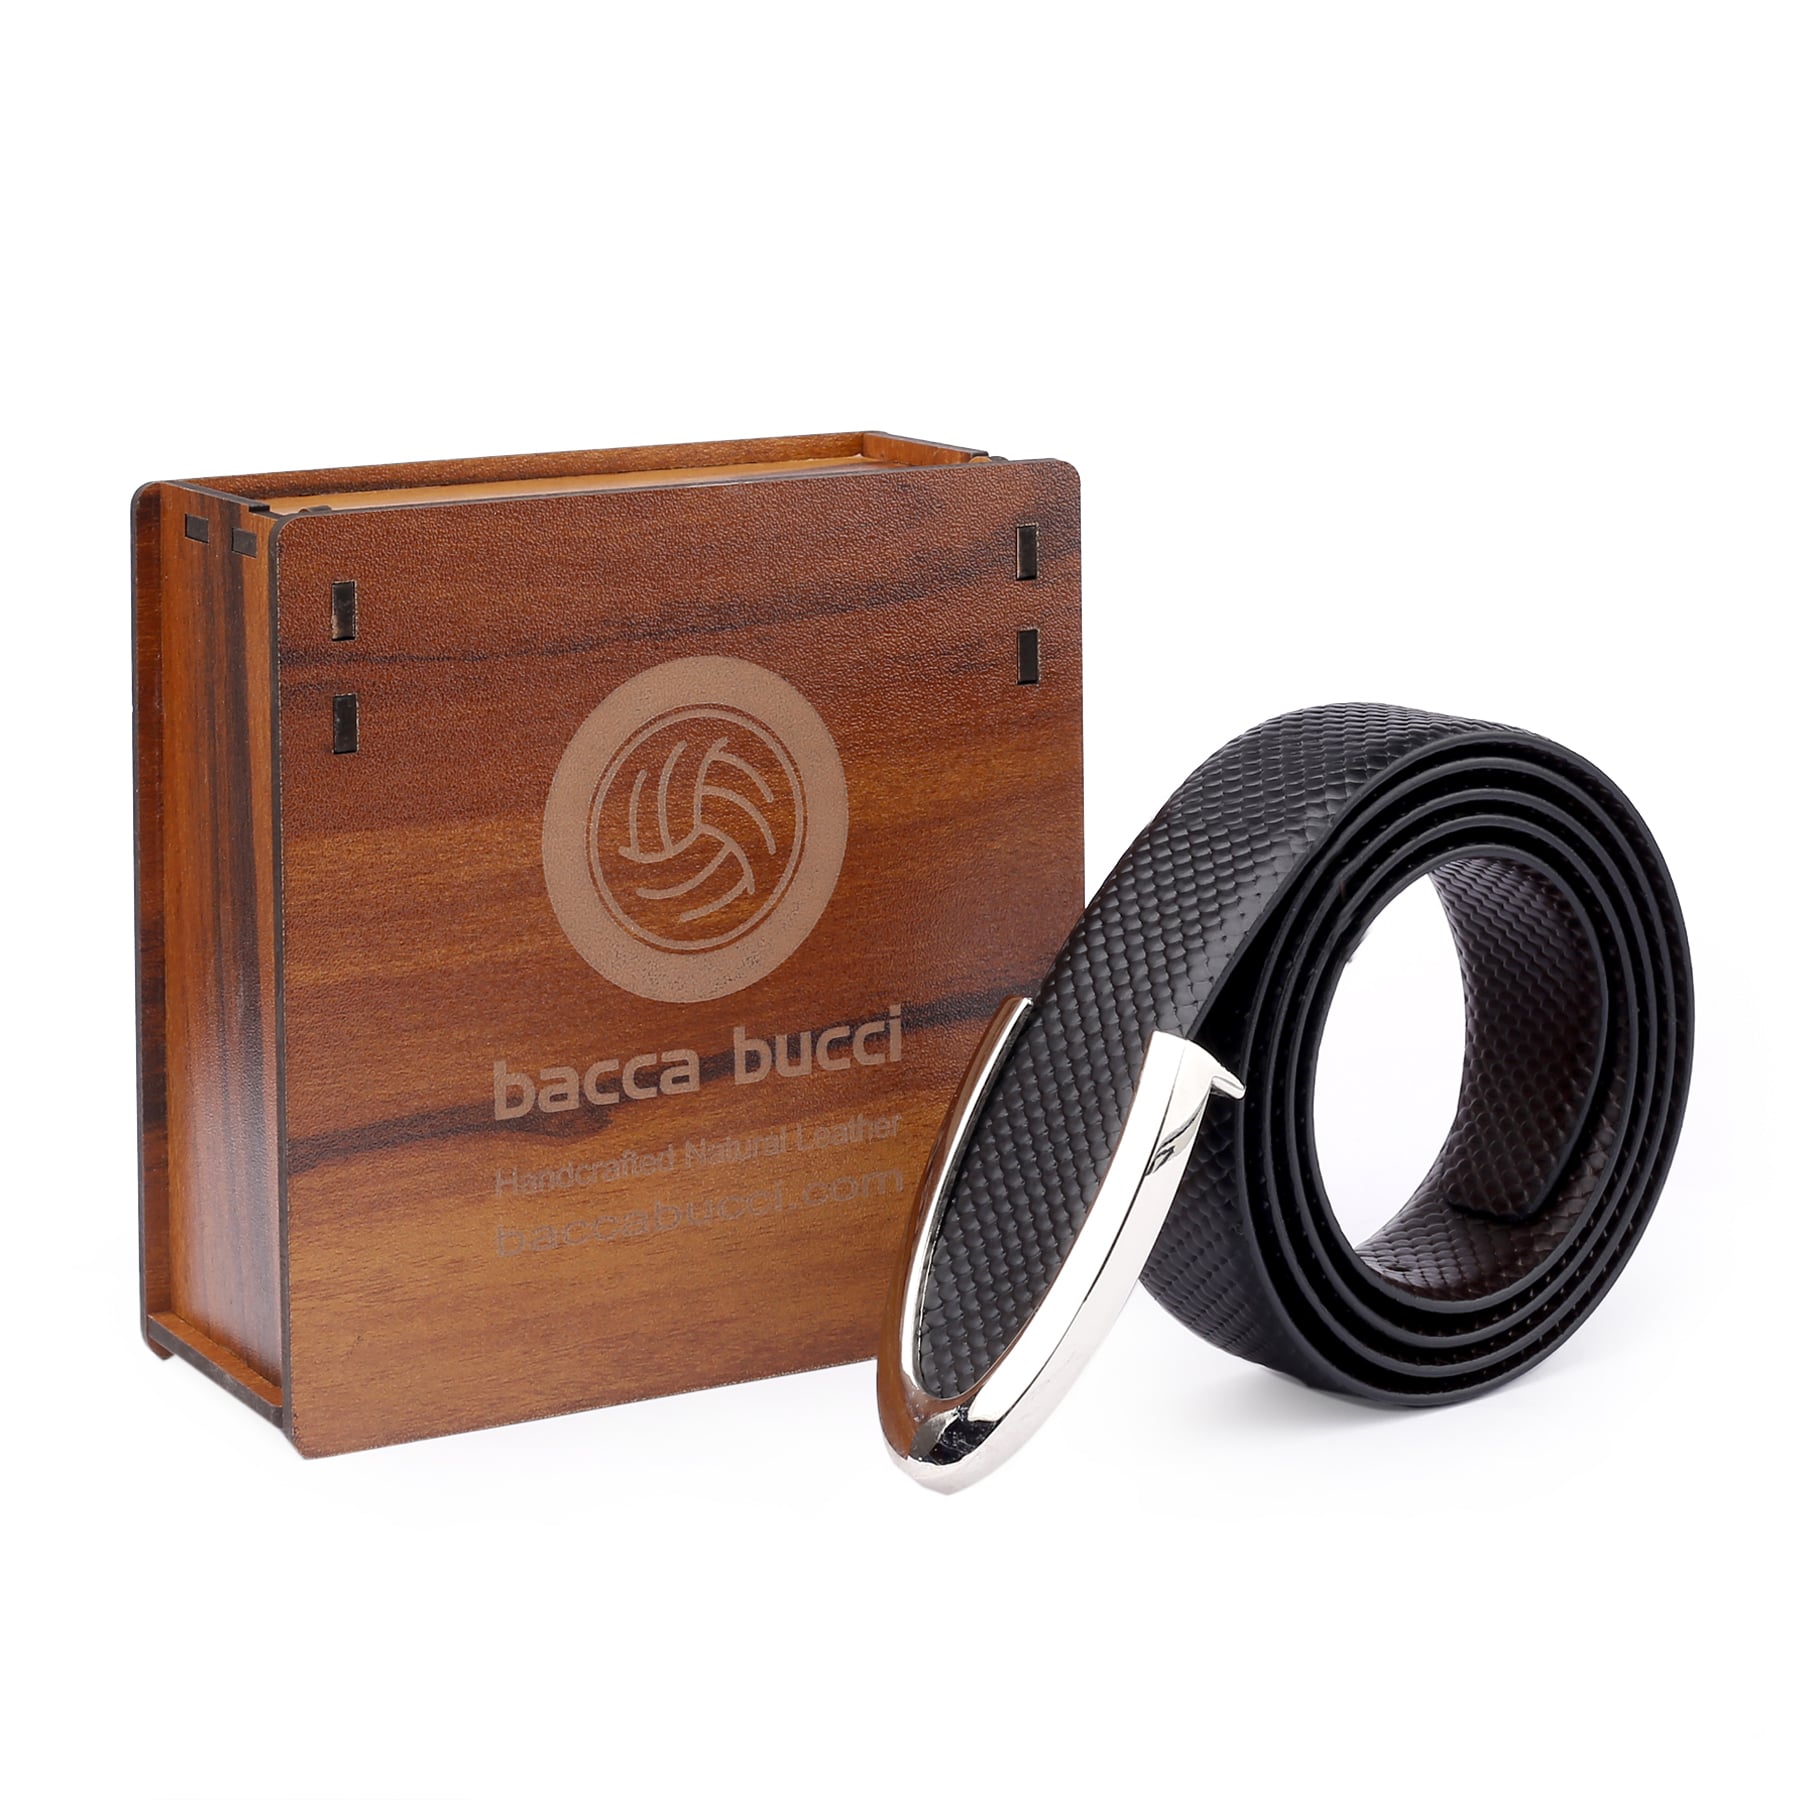 Bacca Bucci Men Leather Dress & Formal Belts | Premium Quality | Classic & Fashion Design for Work Business & Casual